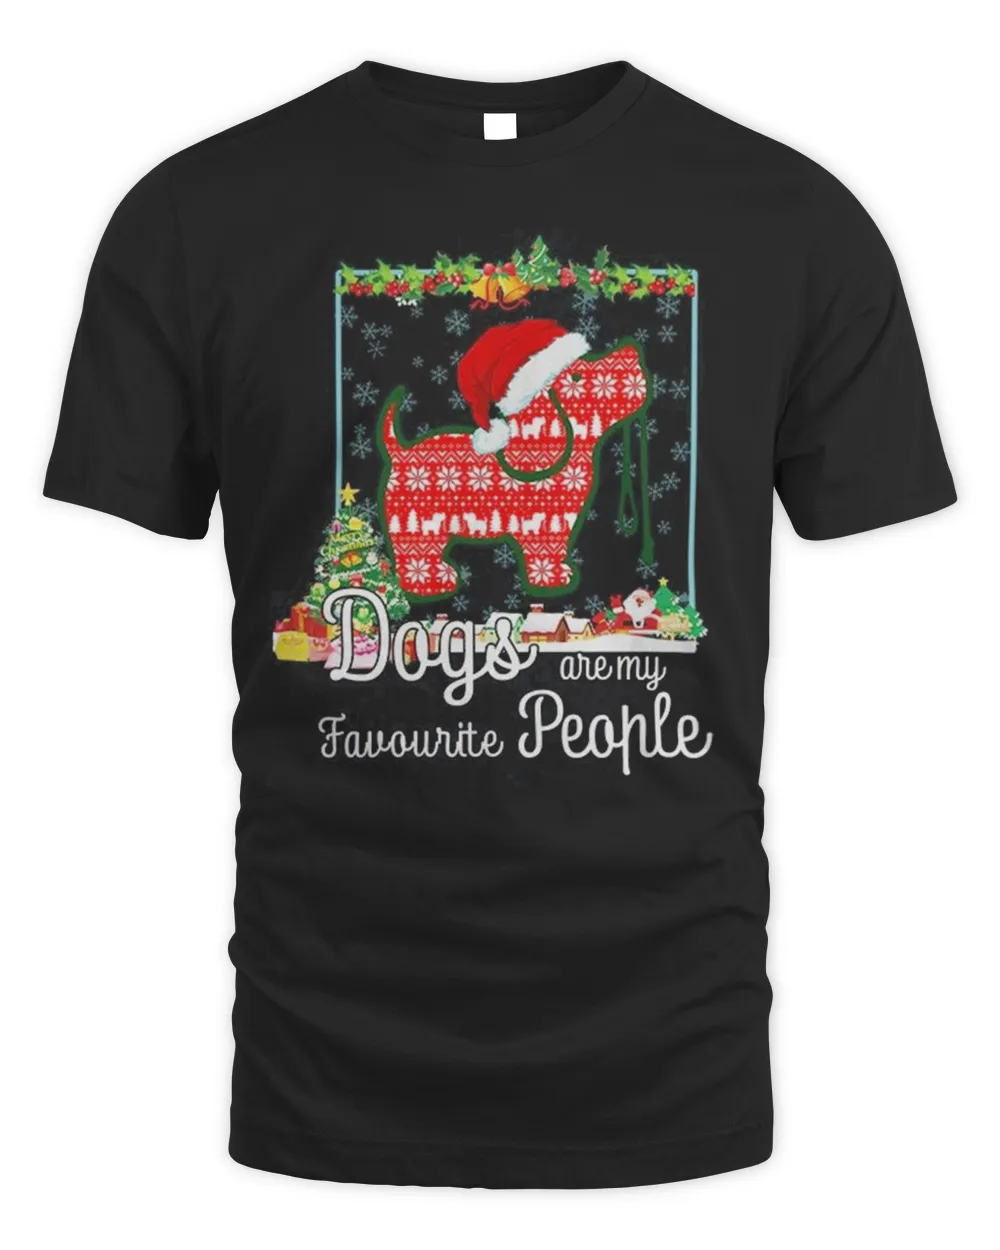 Dogs Are My Favorite People Christmas Tee Shirt